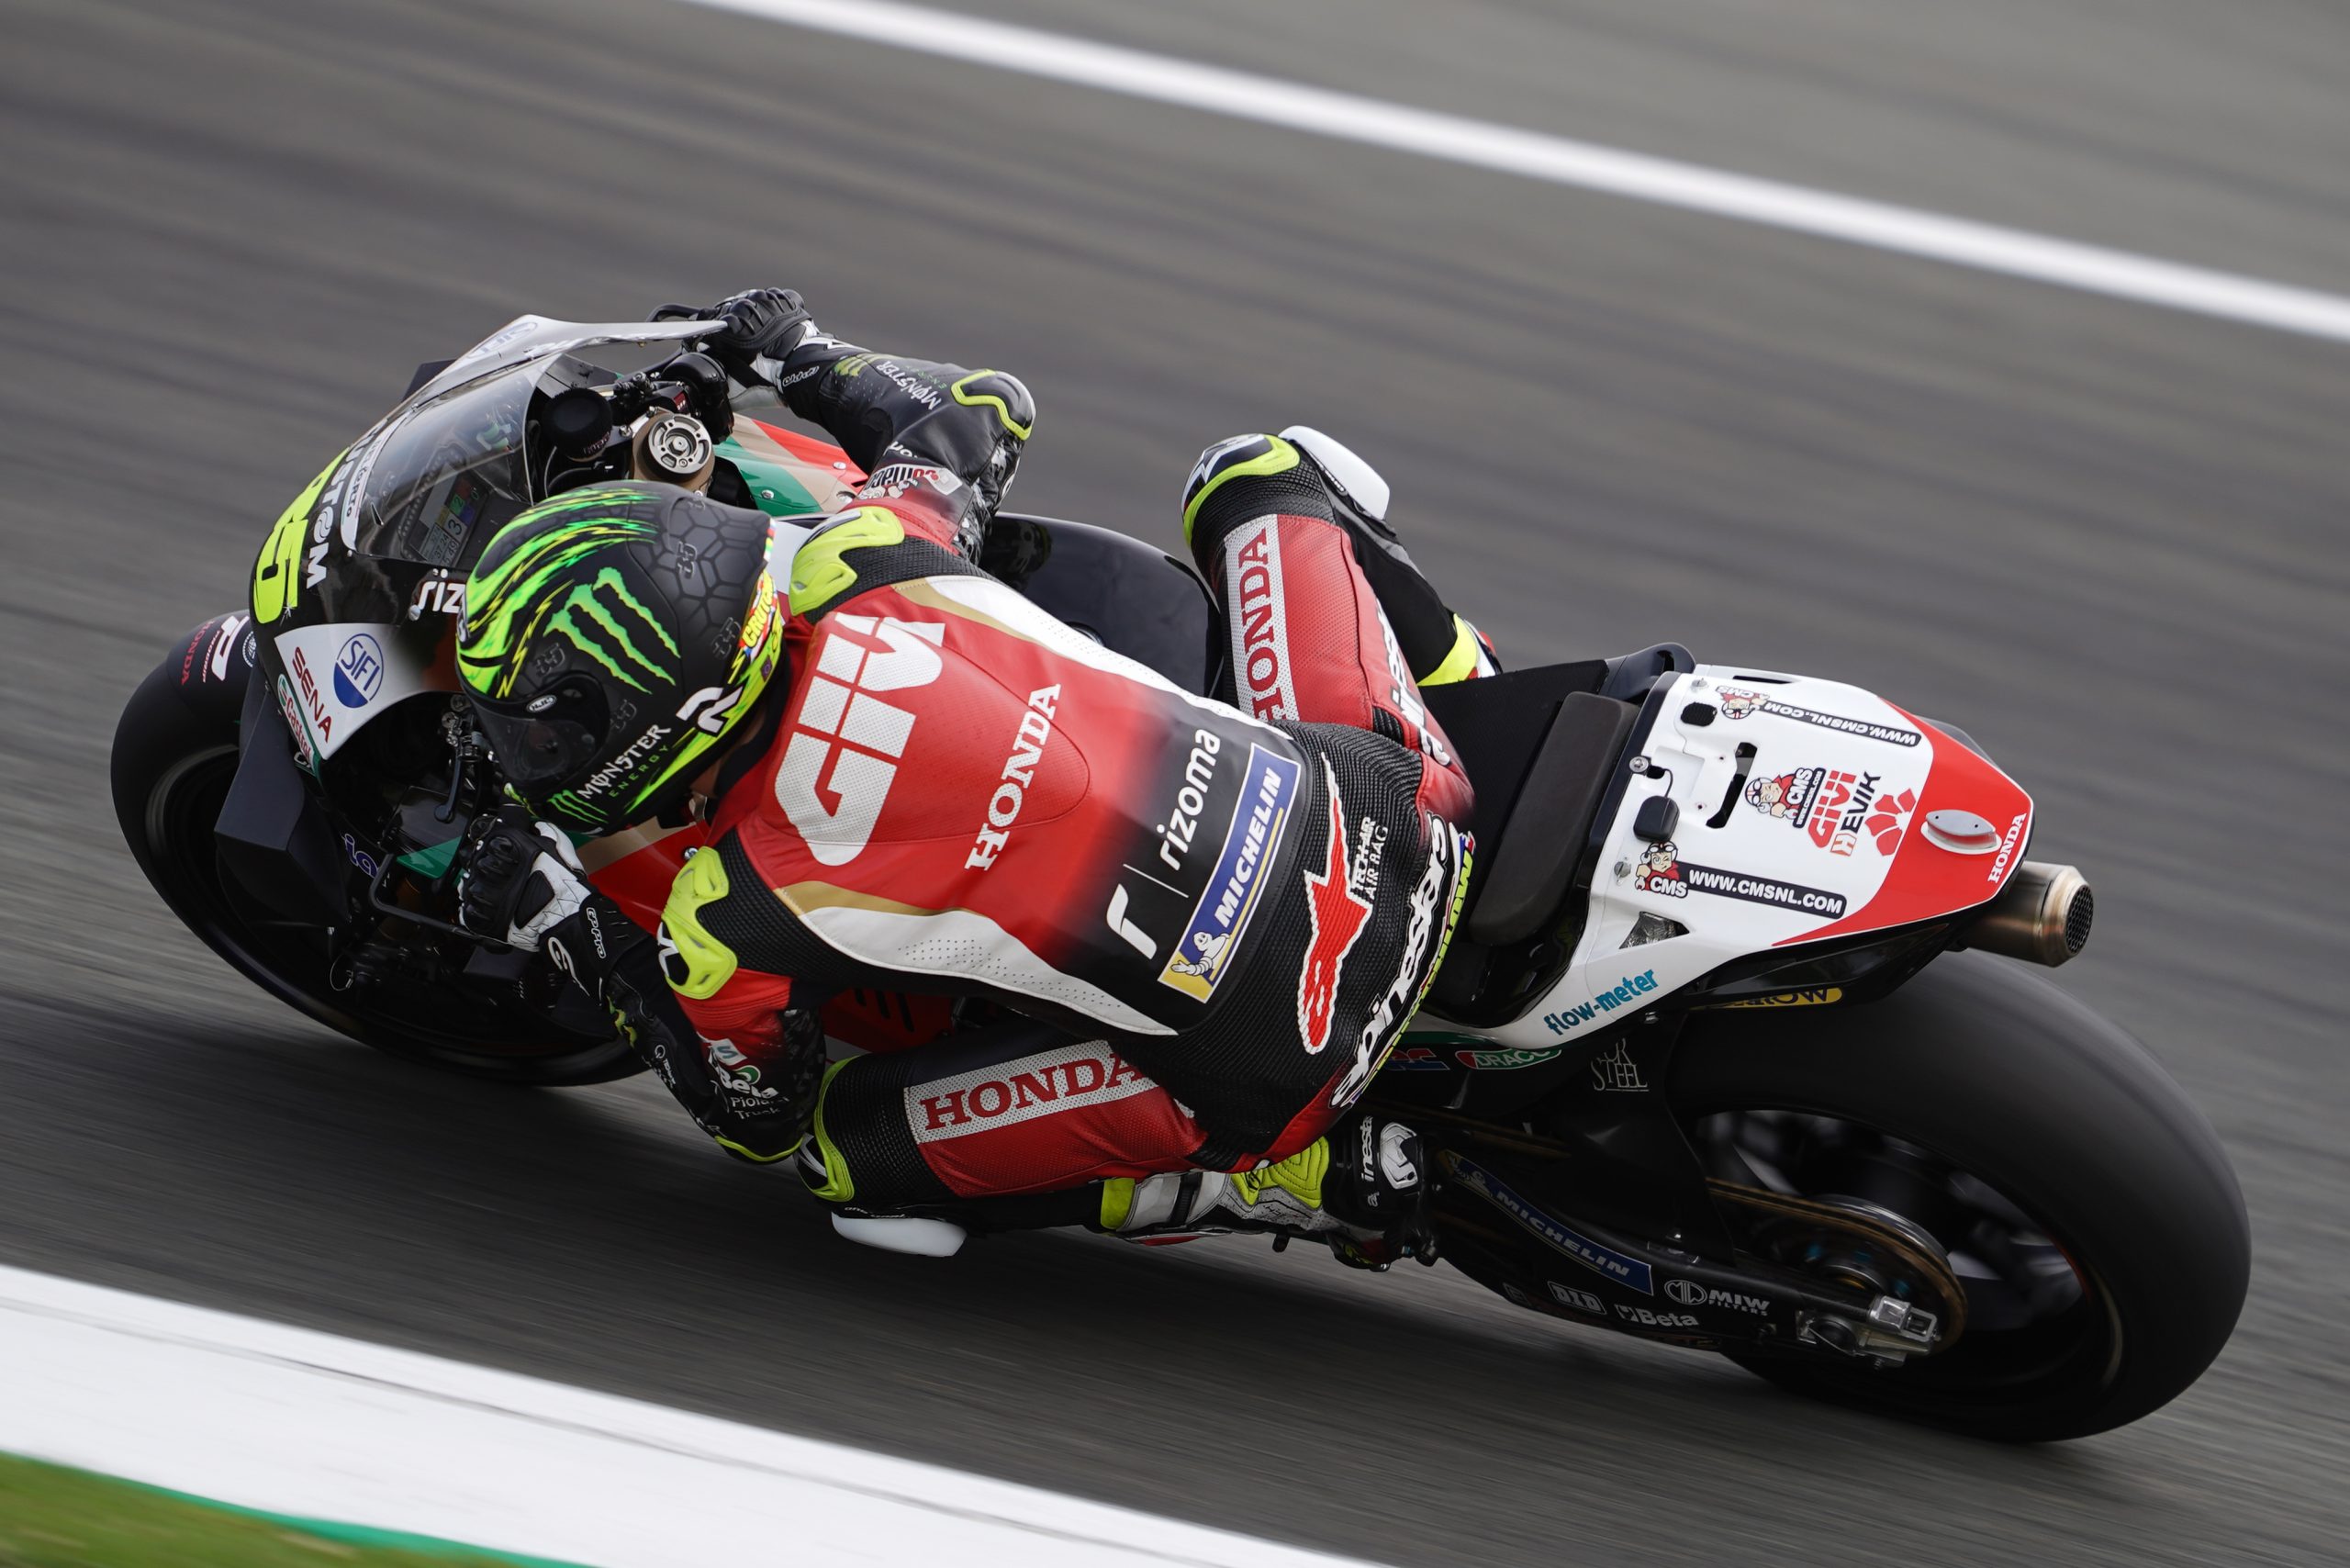 Crutchlow 7th after day 1 in Valencia